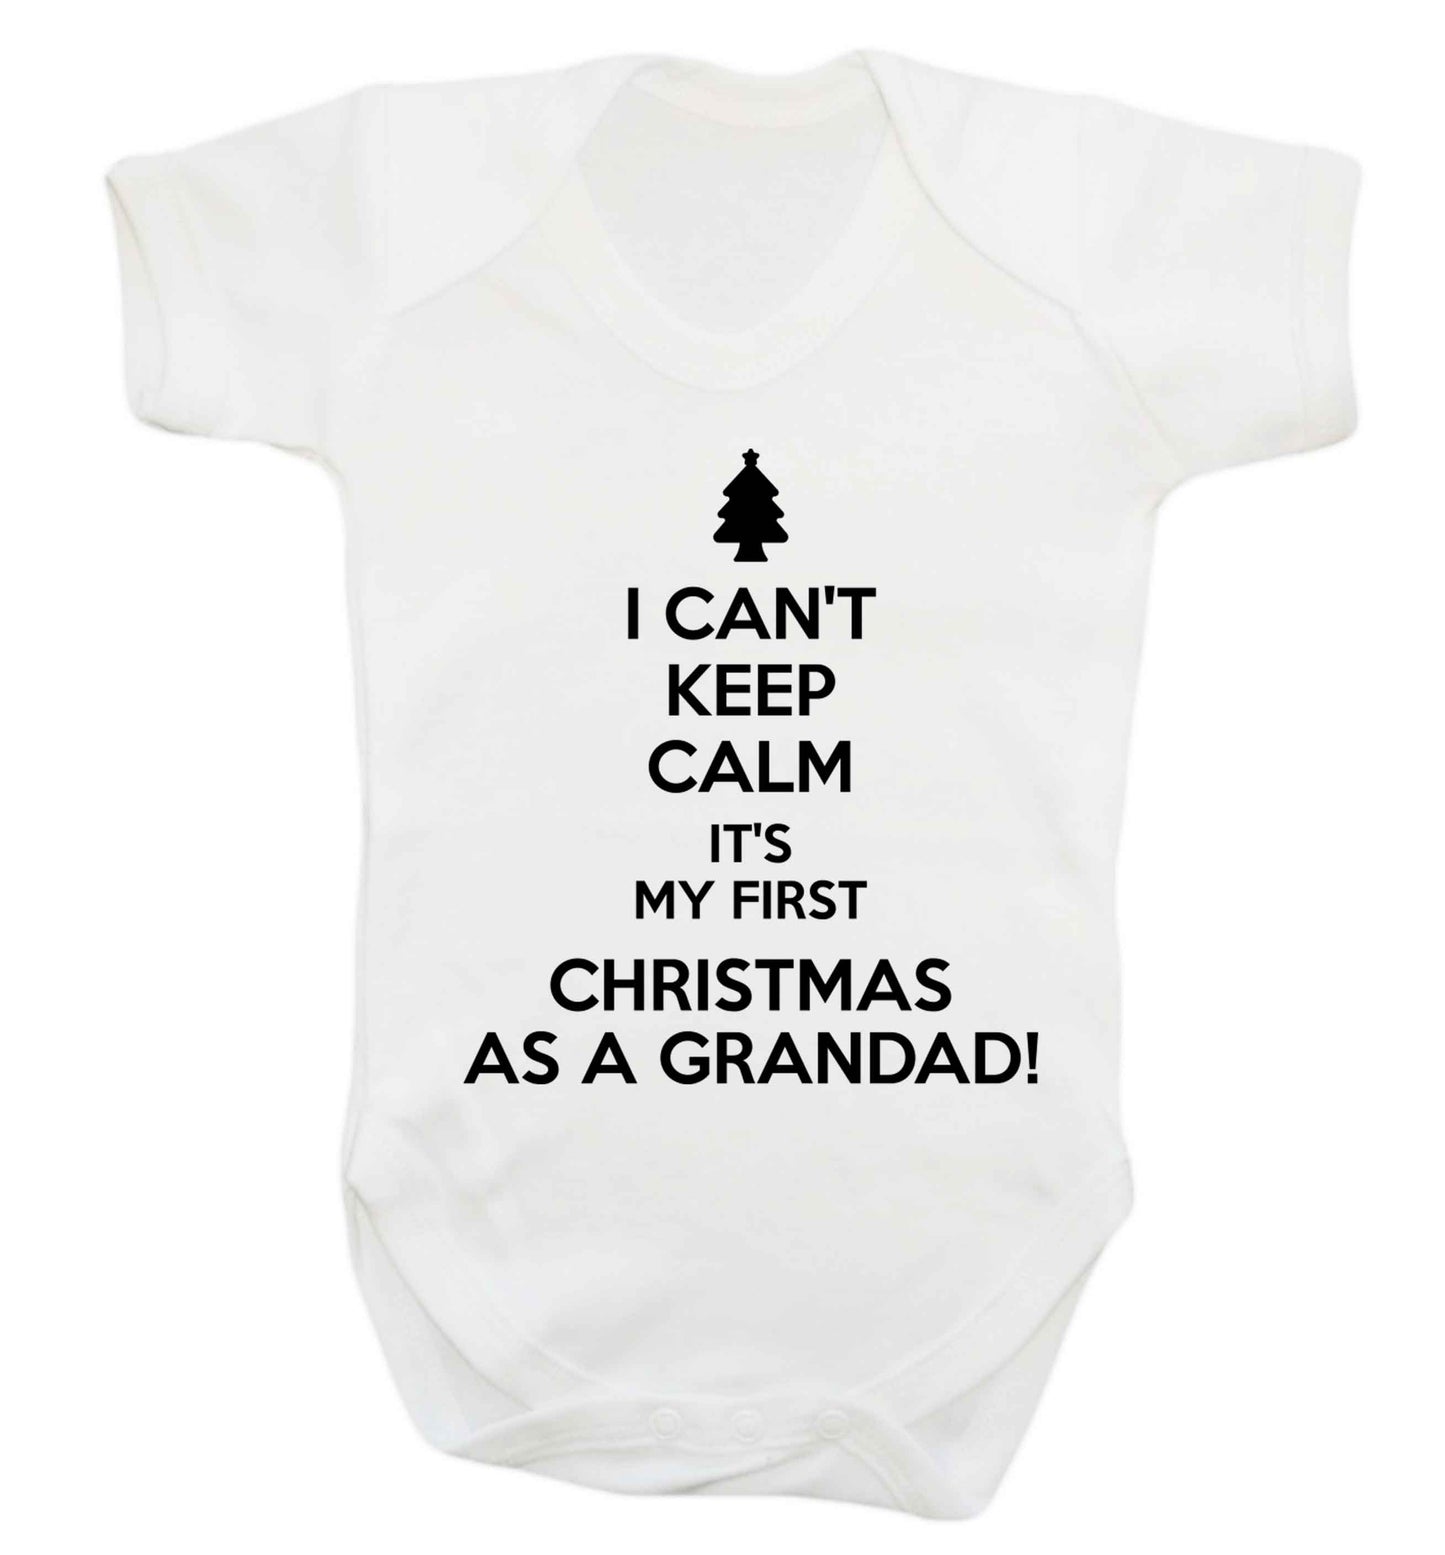 I can't keep calm it's my first Christmas as a grandad! Baby Vest white 18-24 months